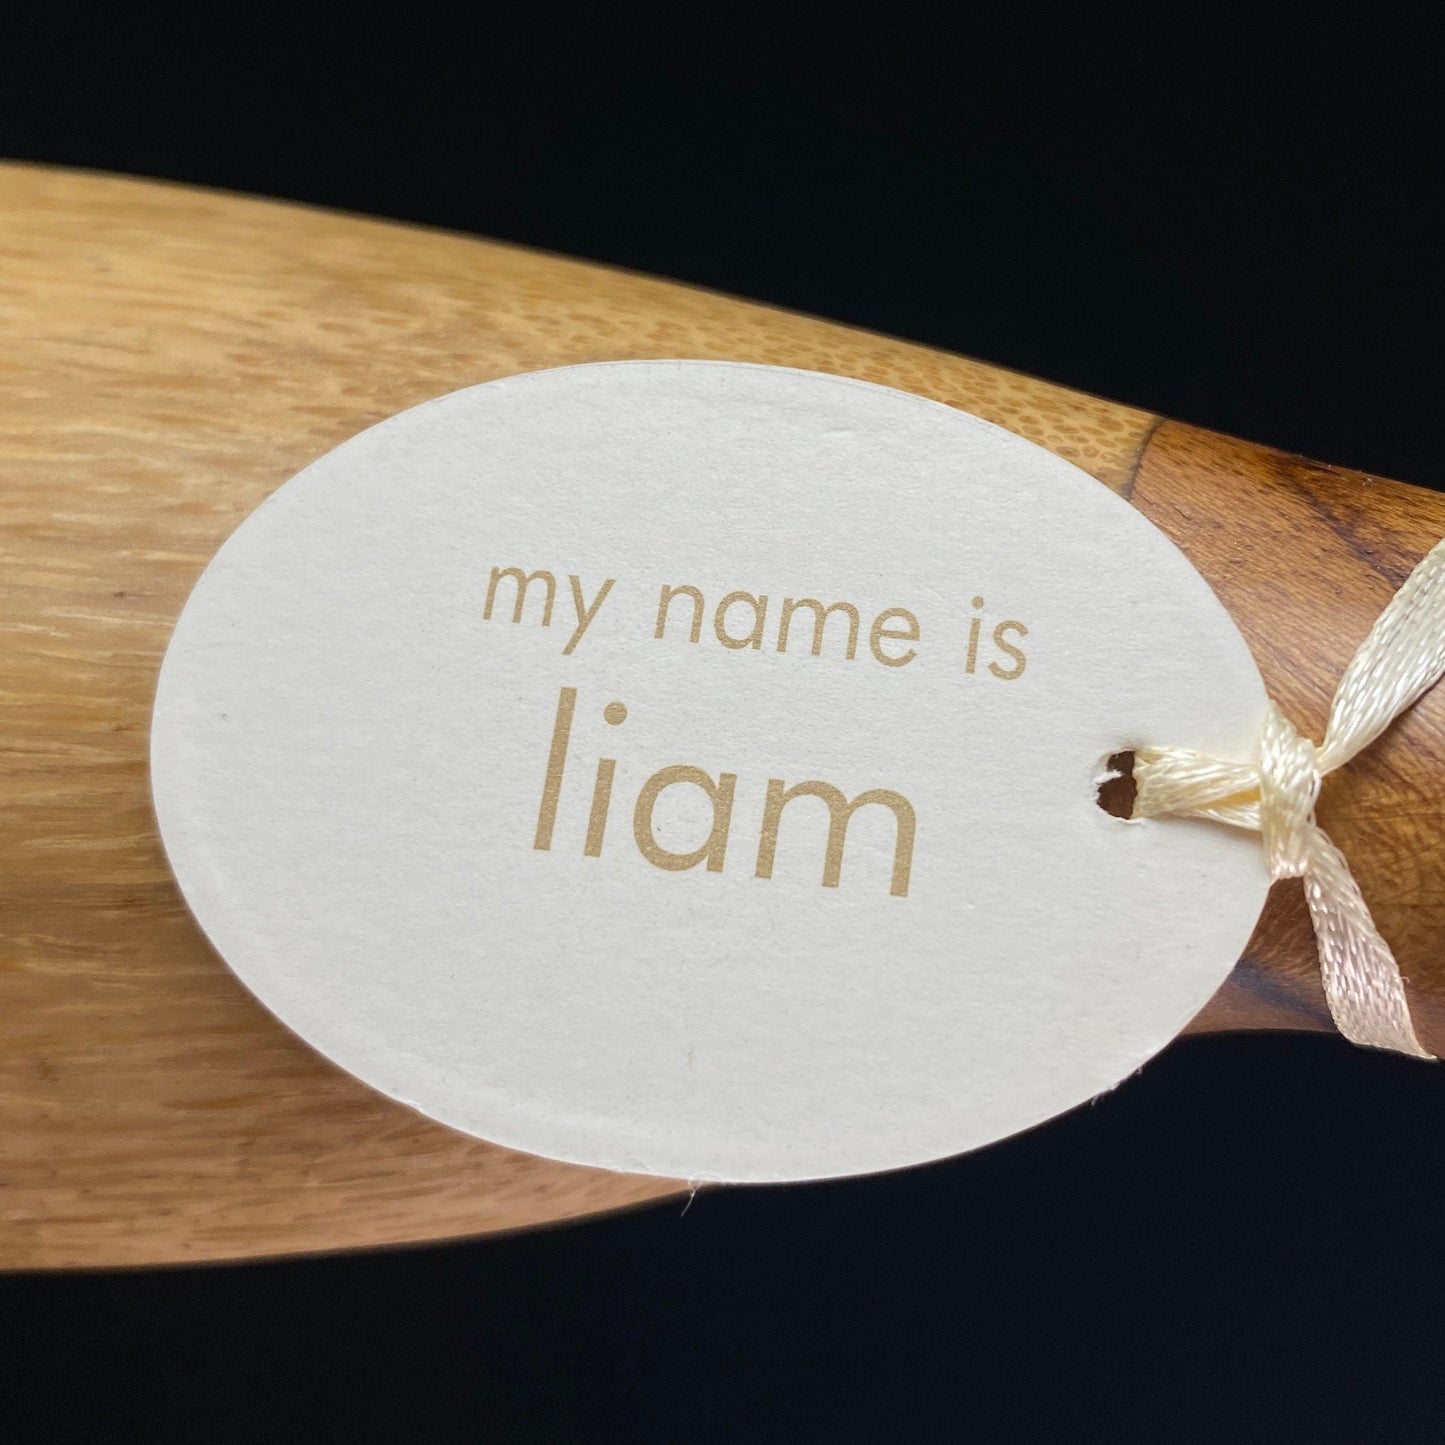 Liam - Hand-carved and Hand-painted Bamboo Duck